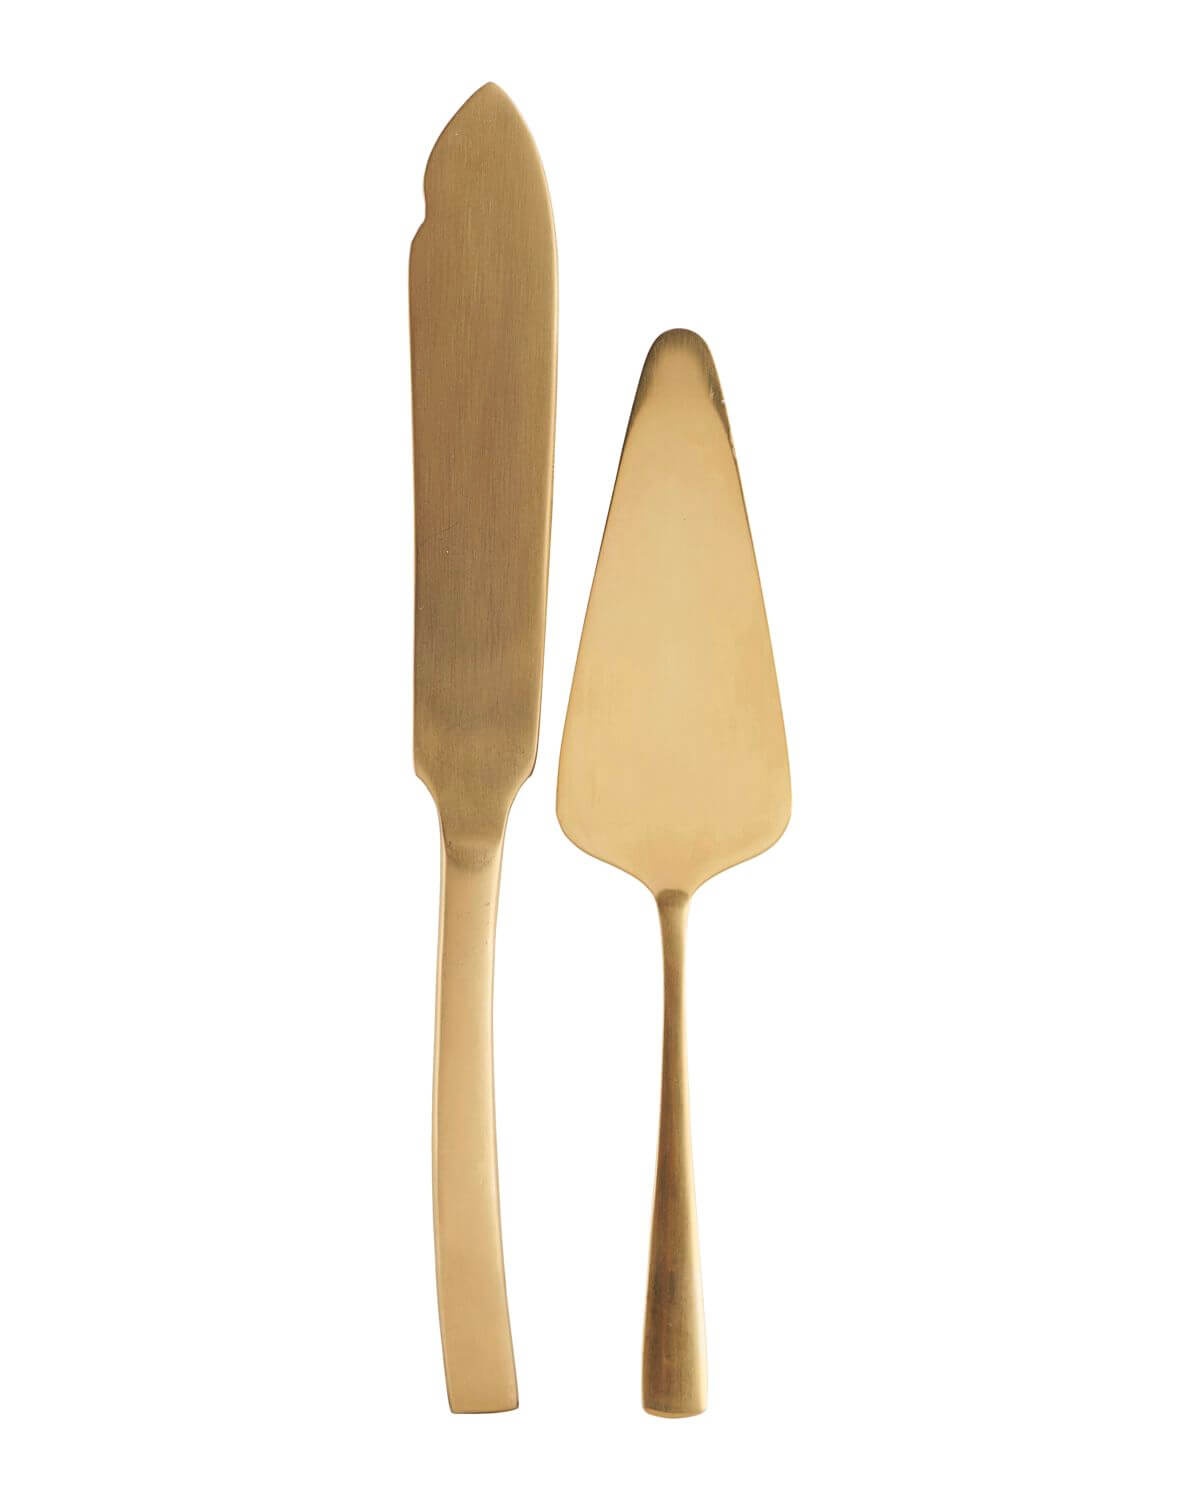 Golden Cake Servers | Stainless Steel | by House Doctor - Lifestory - House Doctor